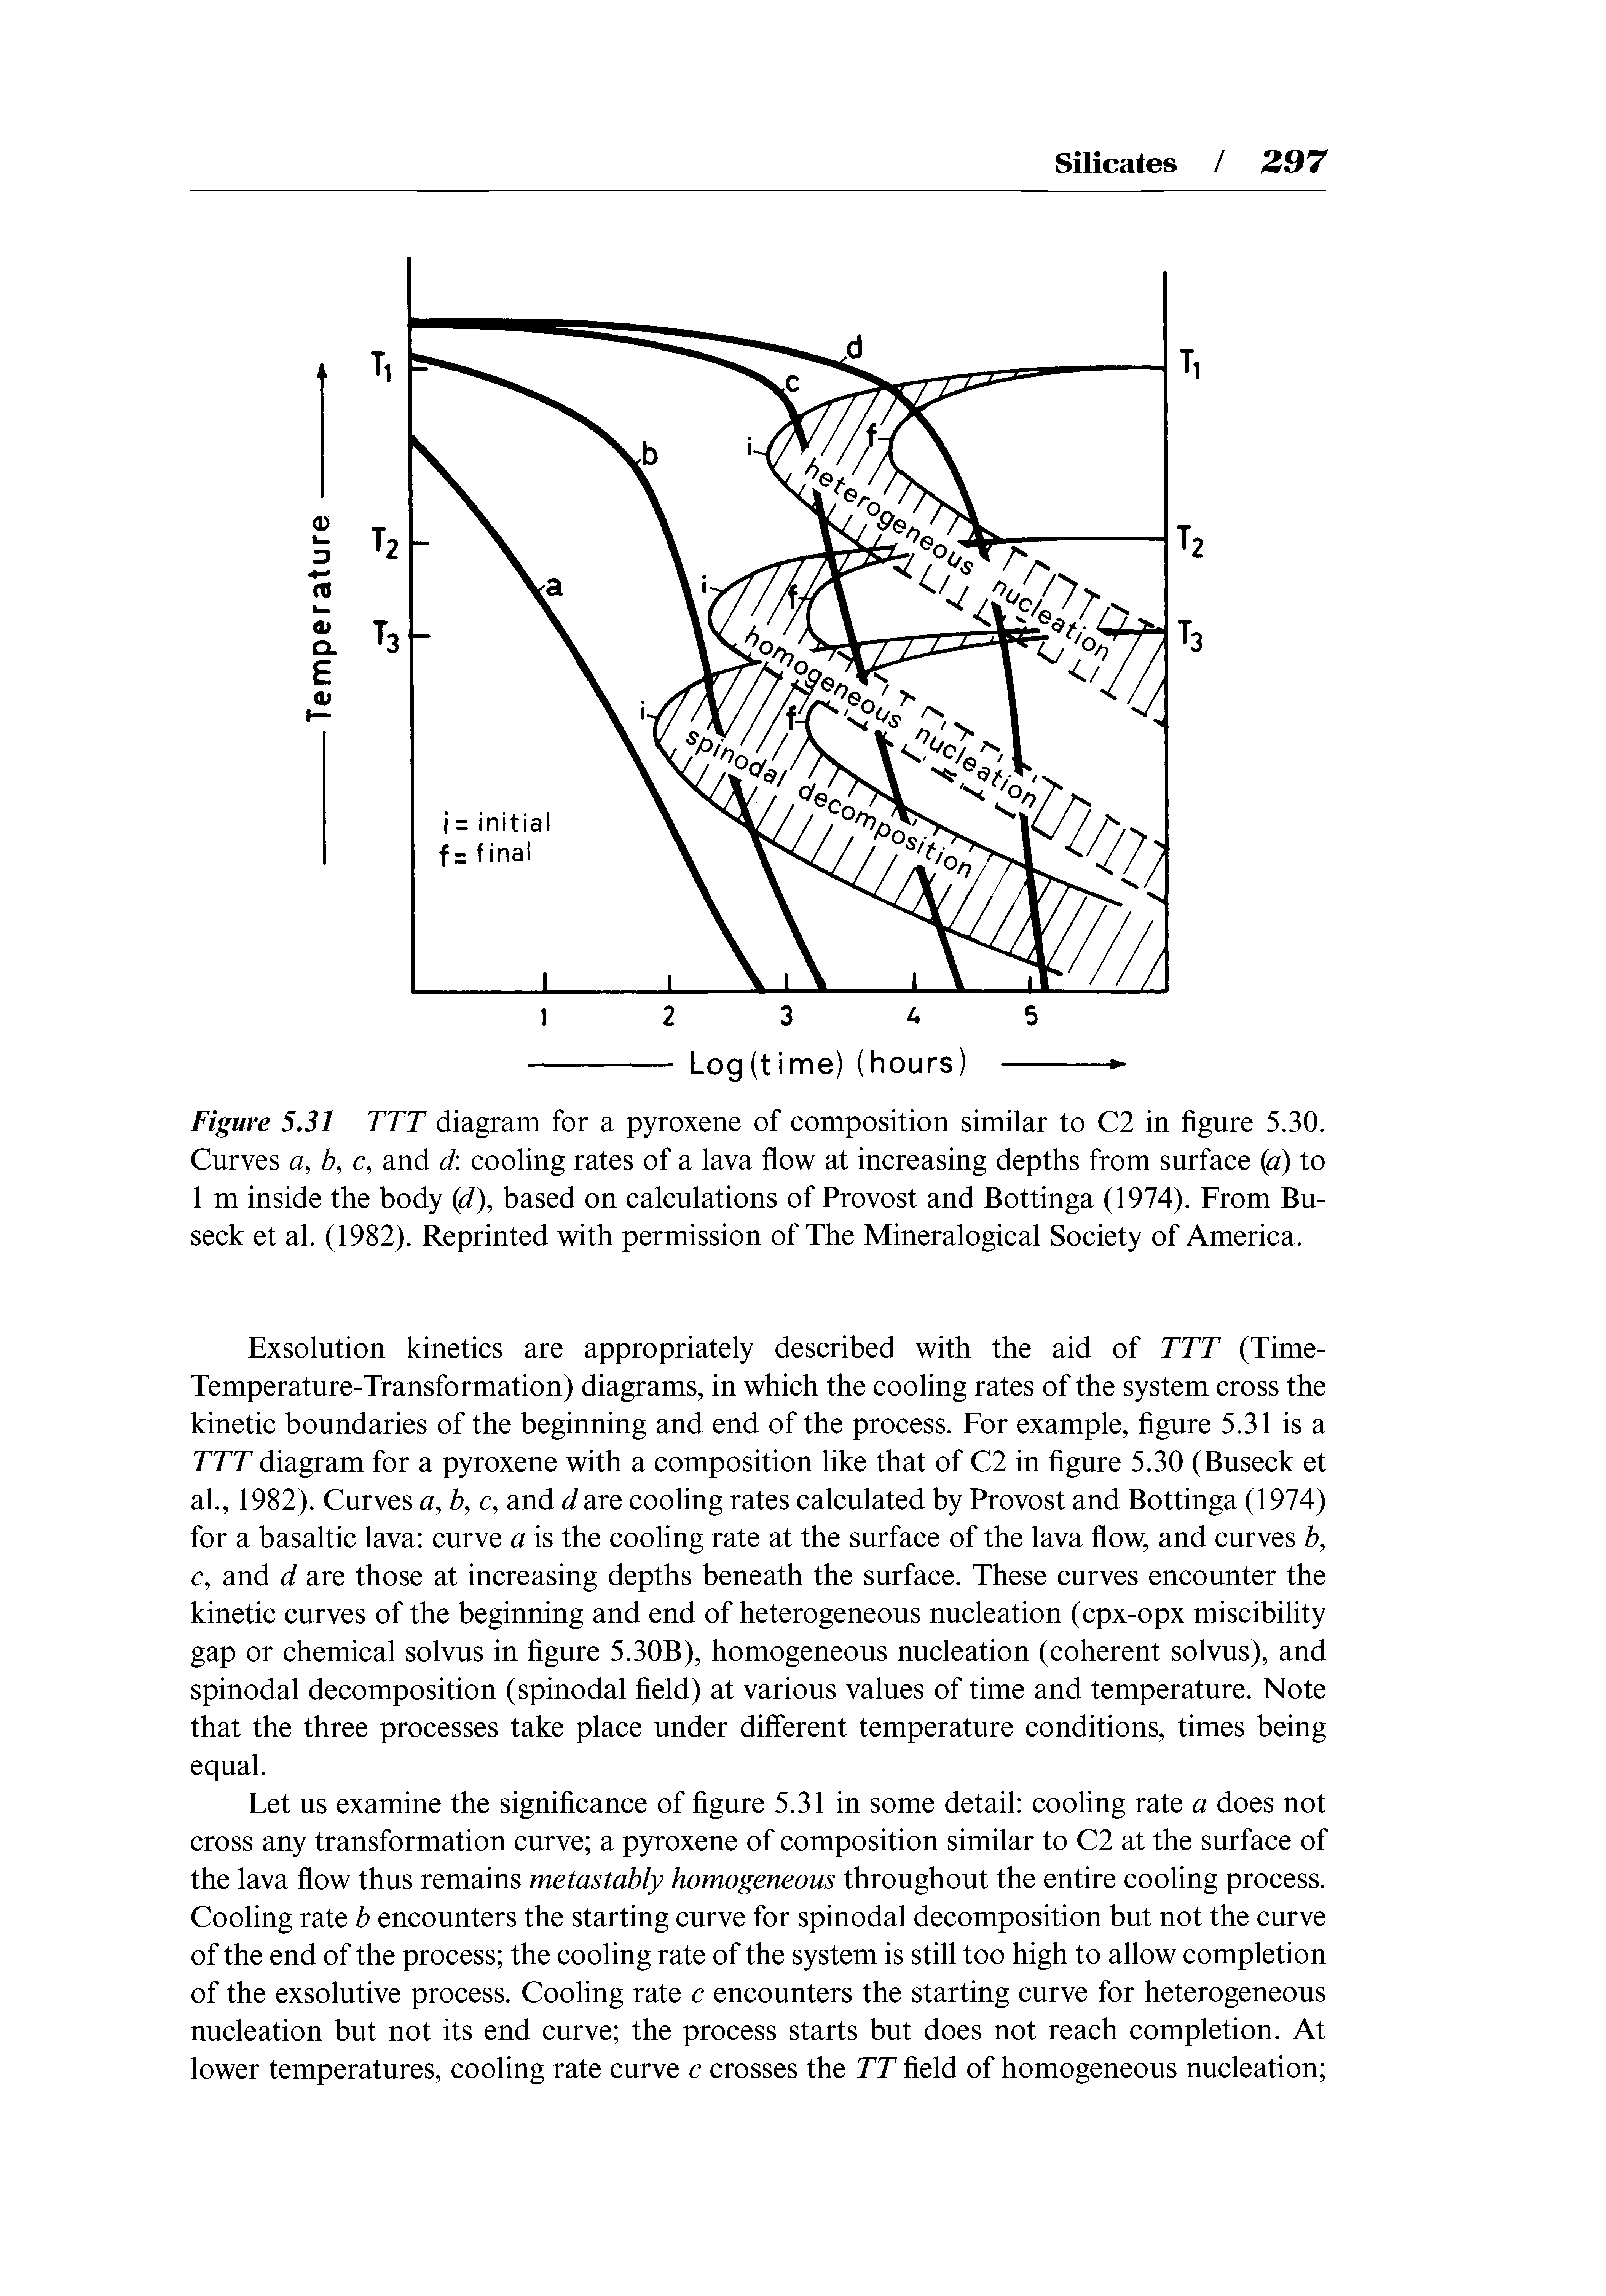 Figure 5.31 TTT diagram for a pyroxene of composition similar to C2 in figure 5.30. Curves a, b, c, and d cooling rates of a lava flow at increasing depths from surface (g) to 1 m inside the body ((i), based on calculations of Provost and Bottinga (1974). From Bu-seck et al. (1982). Reprinted with permission of The Mineralogical Society of America.